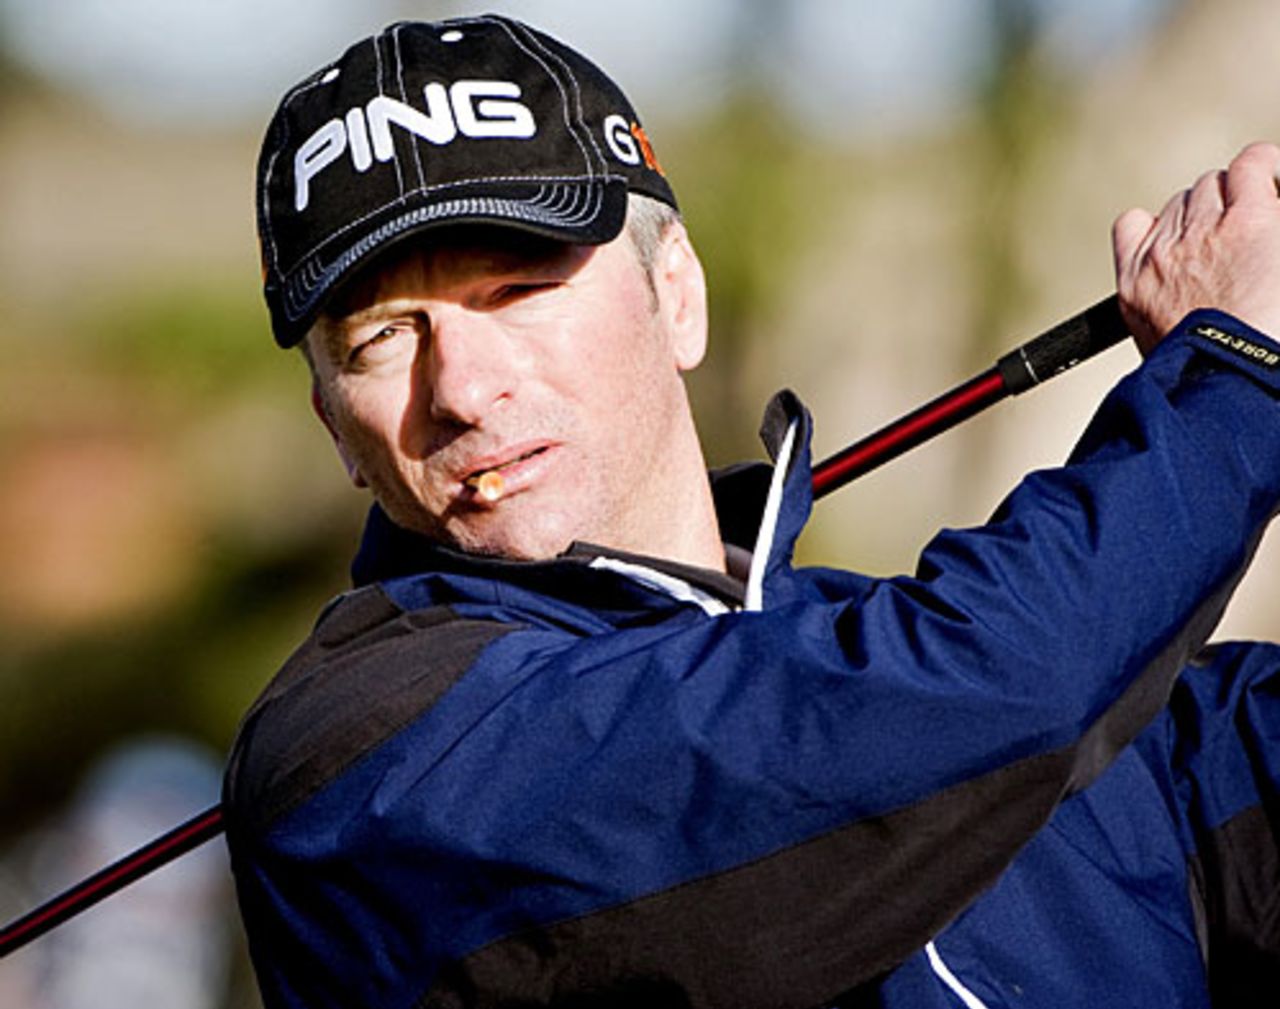 Steve Waugh plays golf at the Alfred Dunhill Golf Championship, Carnoustie, Scotland, October 4, 2009